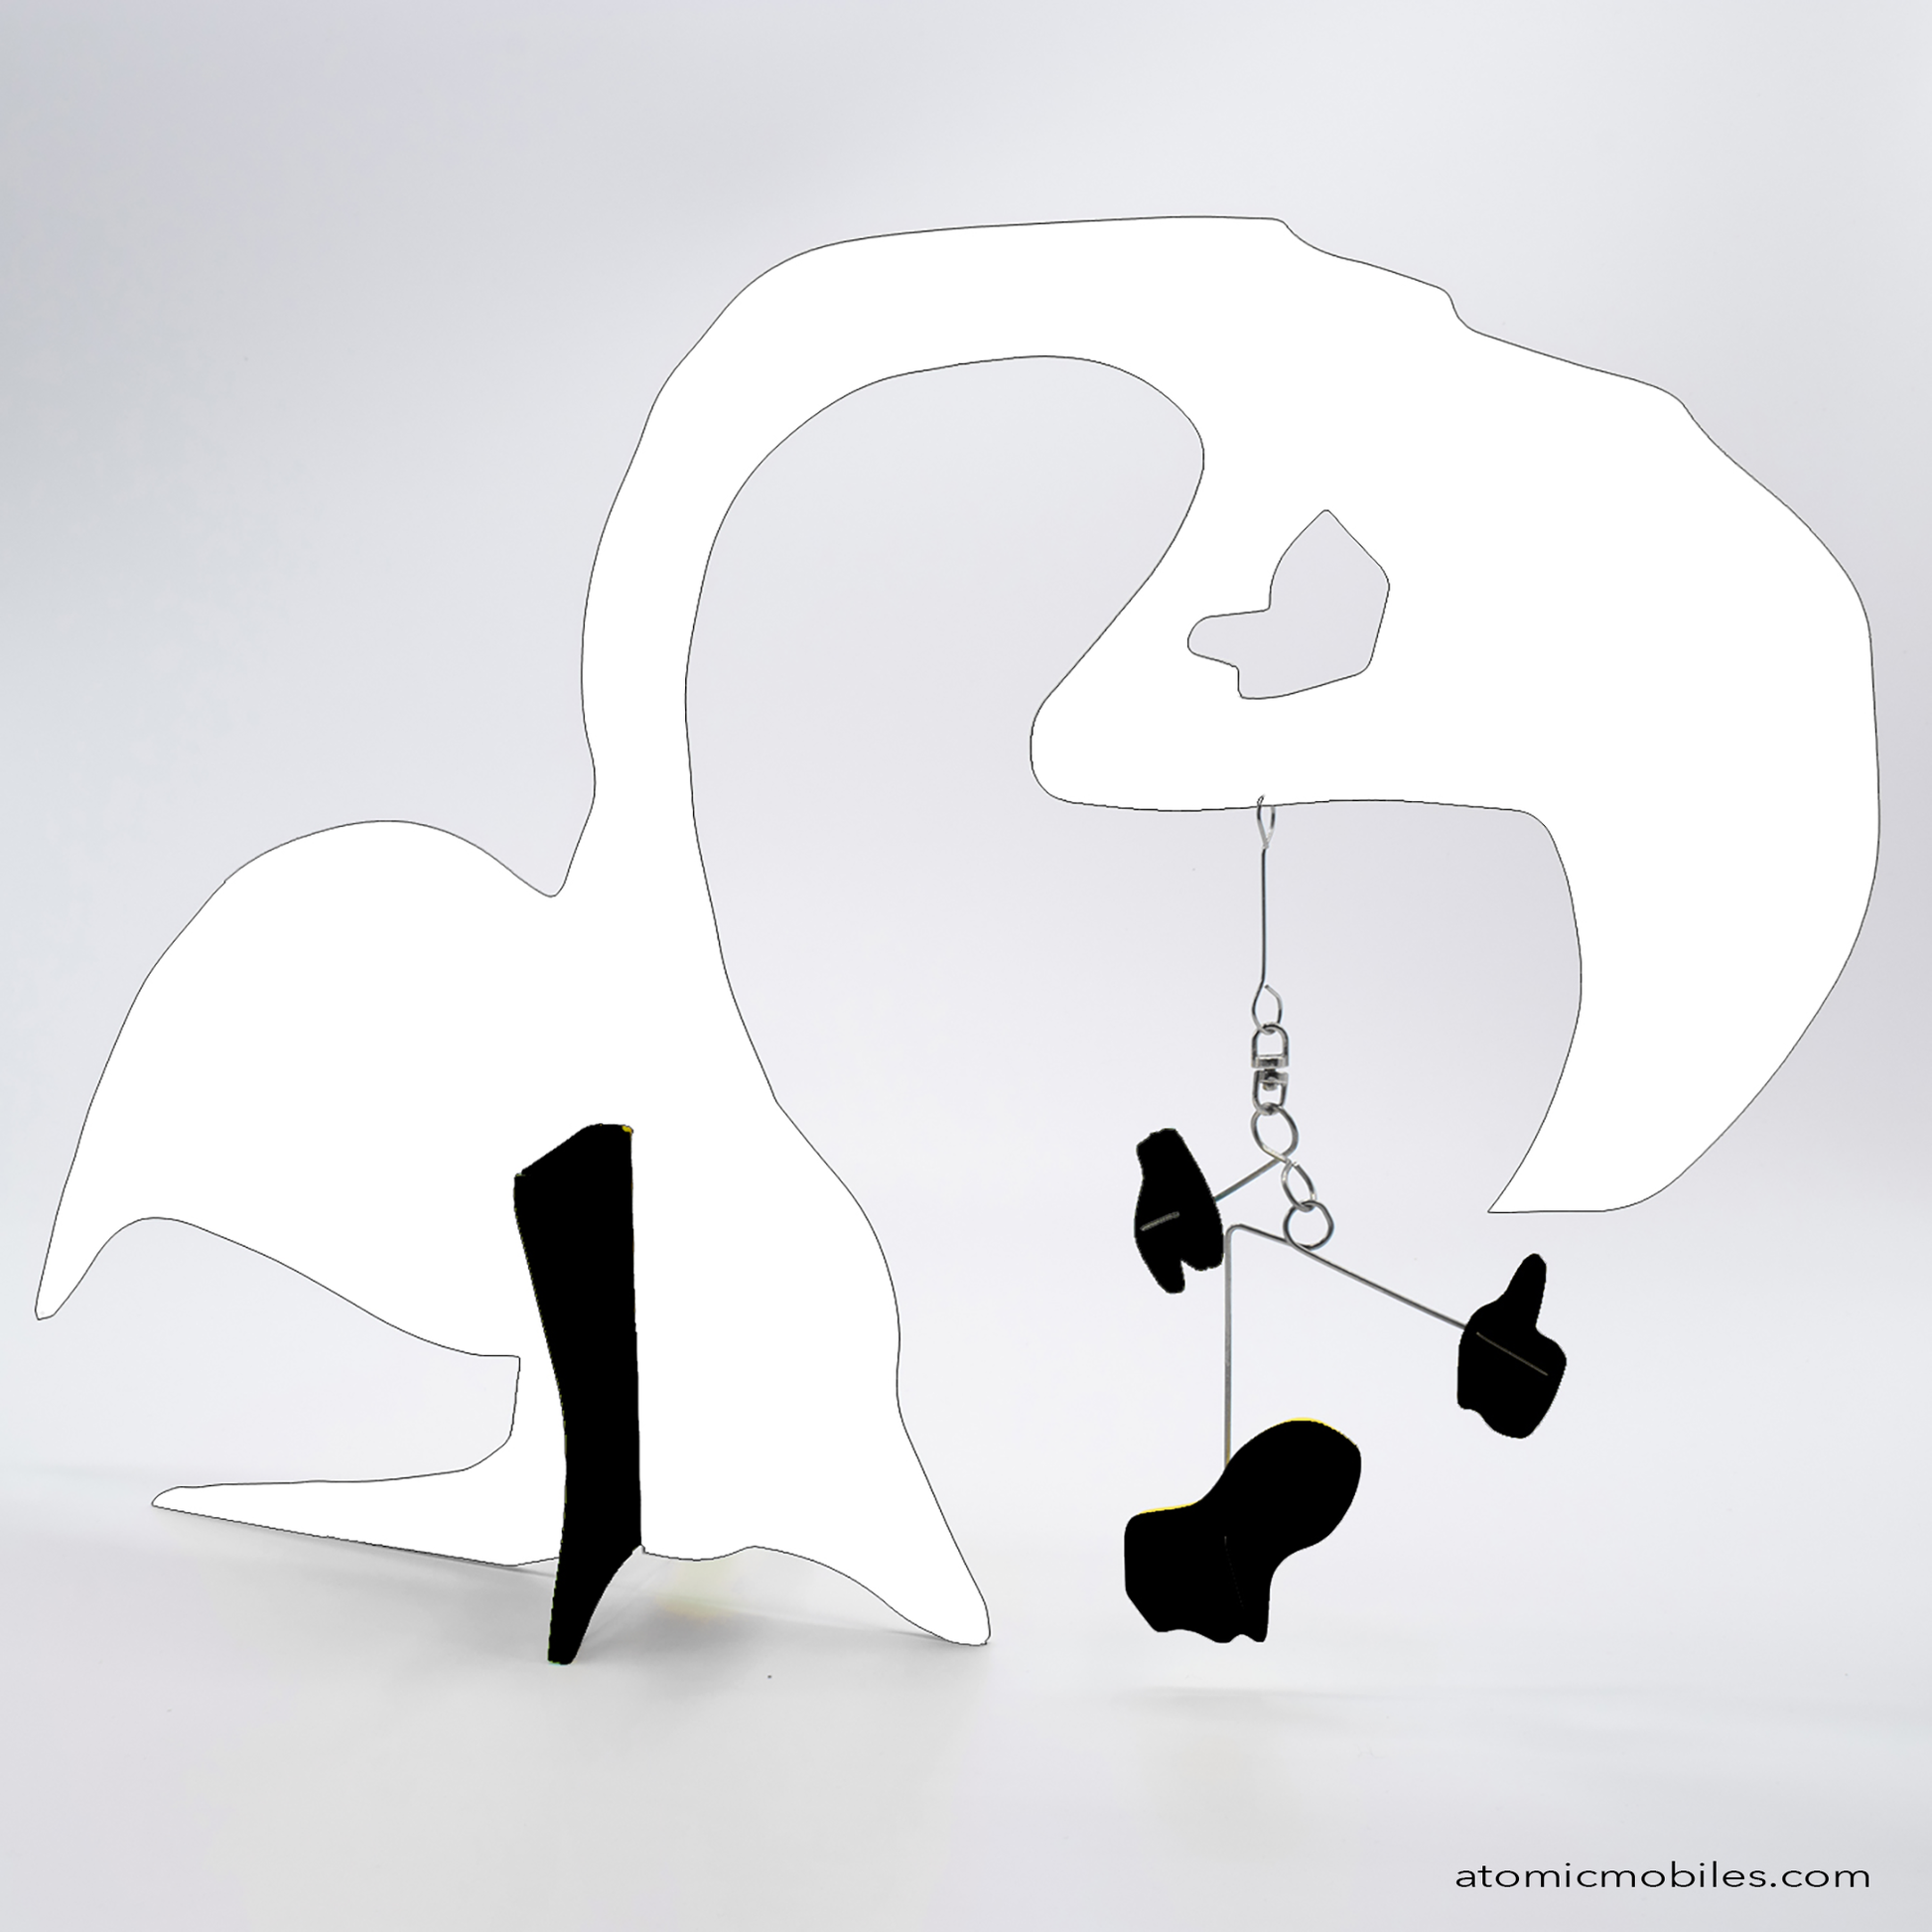 KinetiCats Collection Flamingo in White and Black - one of 12 Modern Cute Abstract Animal Art Sculpture Kinetic Stabiles inspired by Dada and mid century modern style art by AtomicMobiles.com